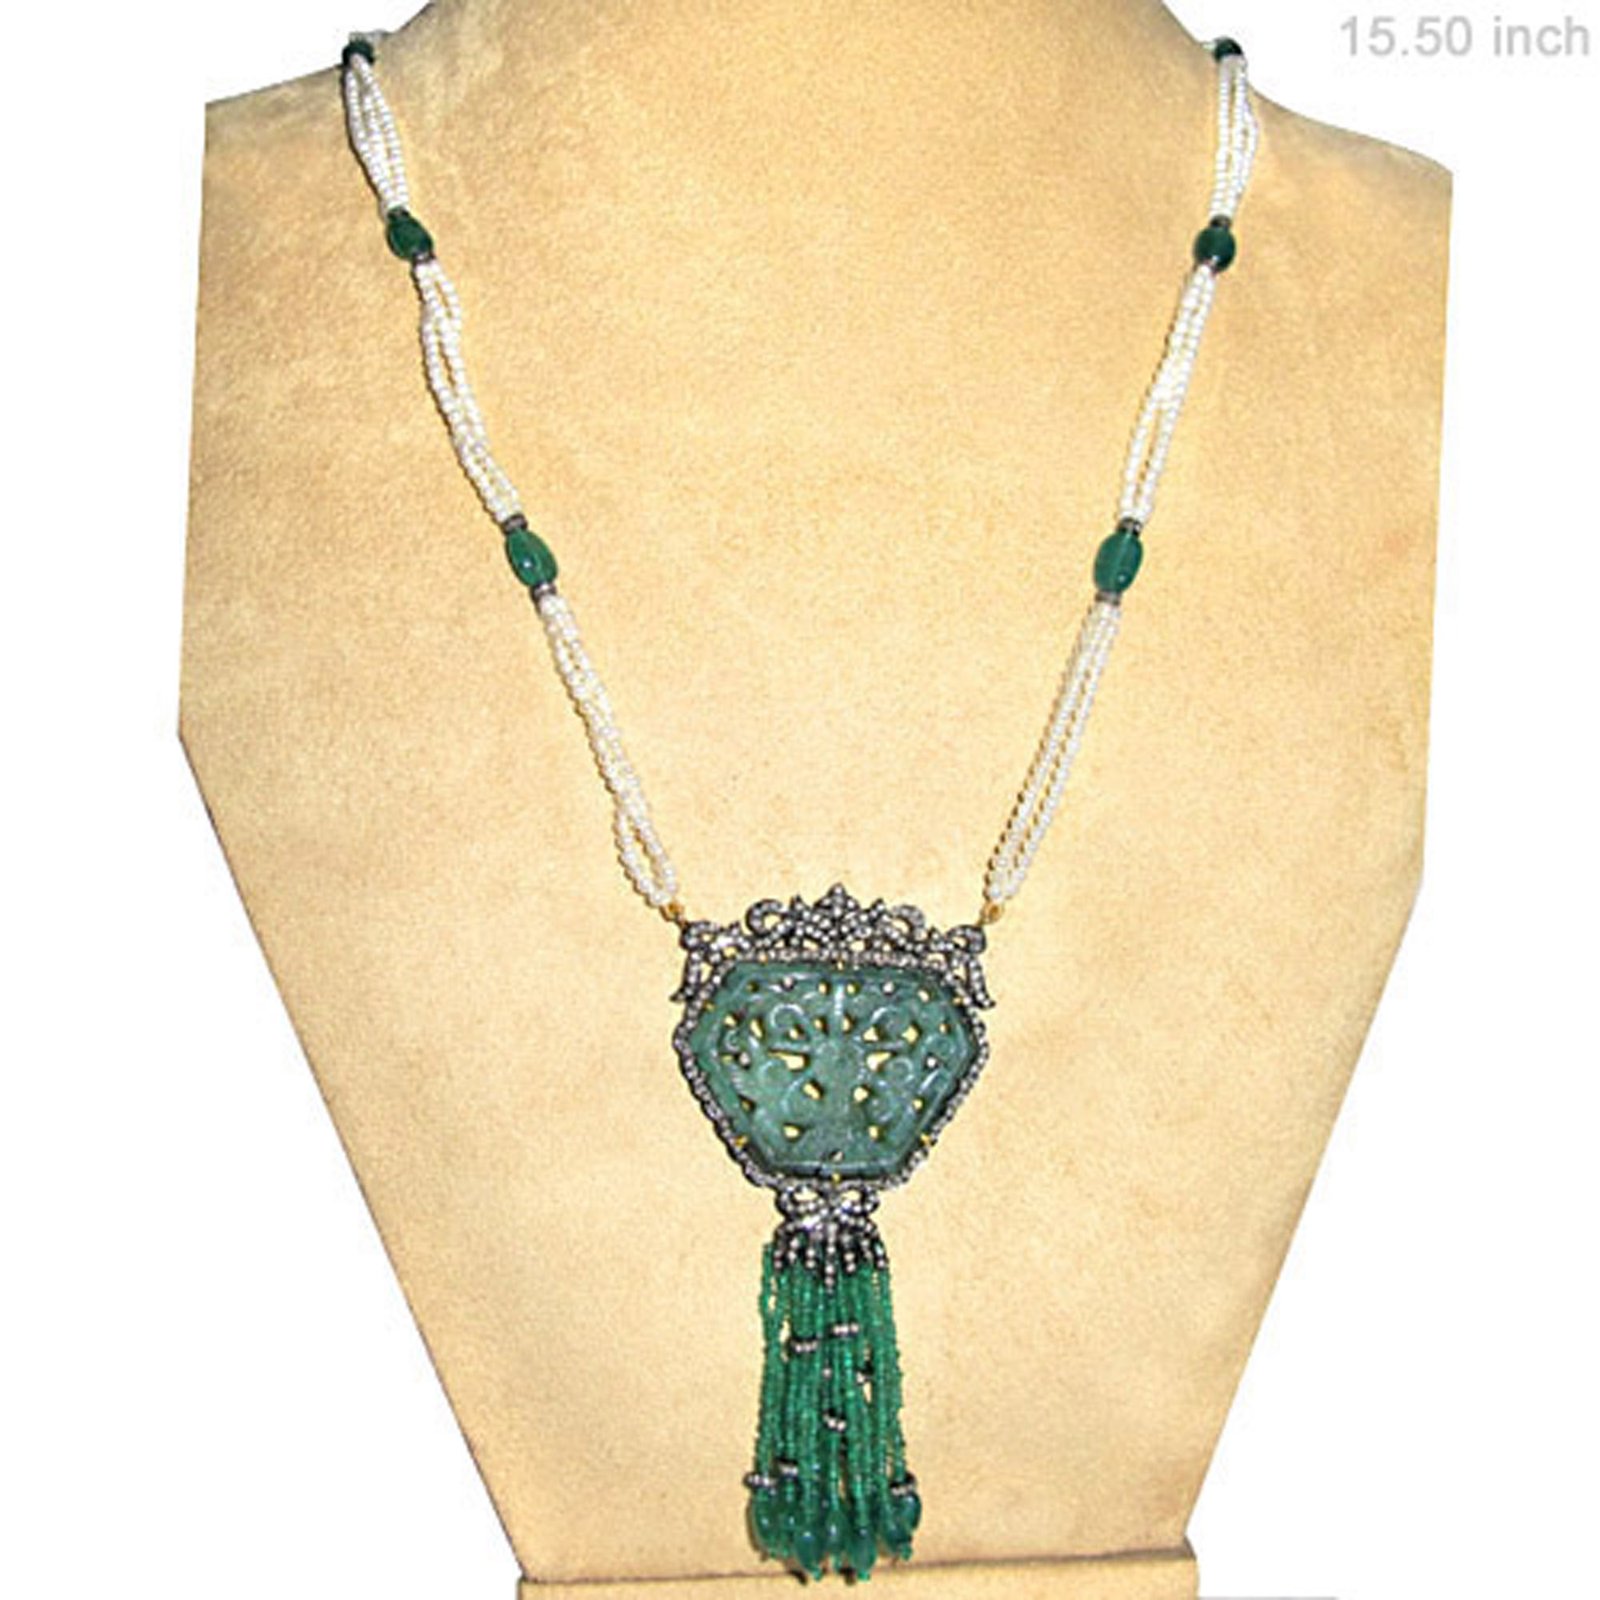 Emerald carving pendant pearl tassel necklace